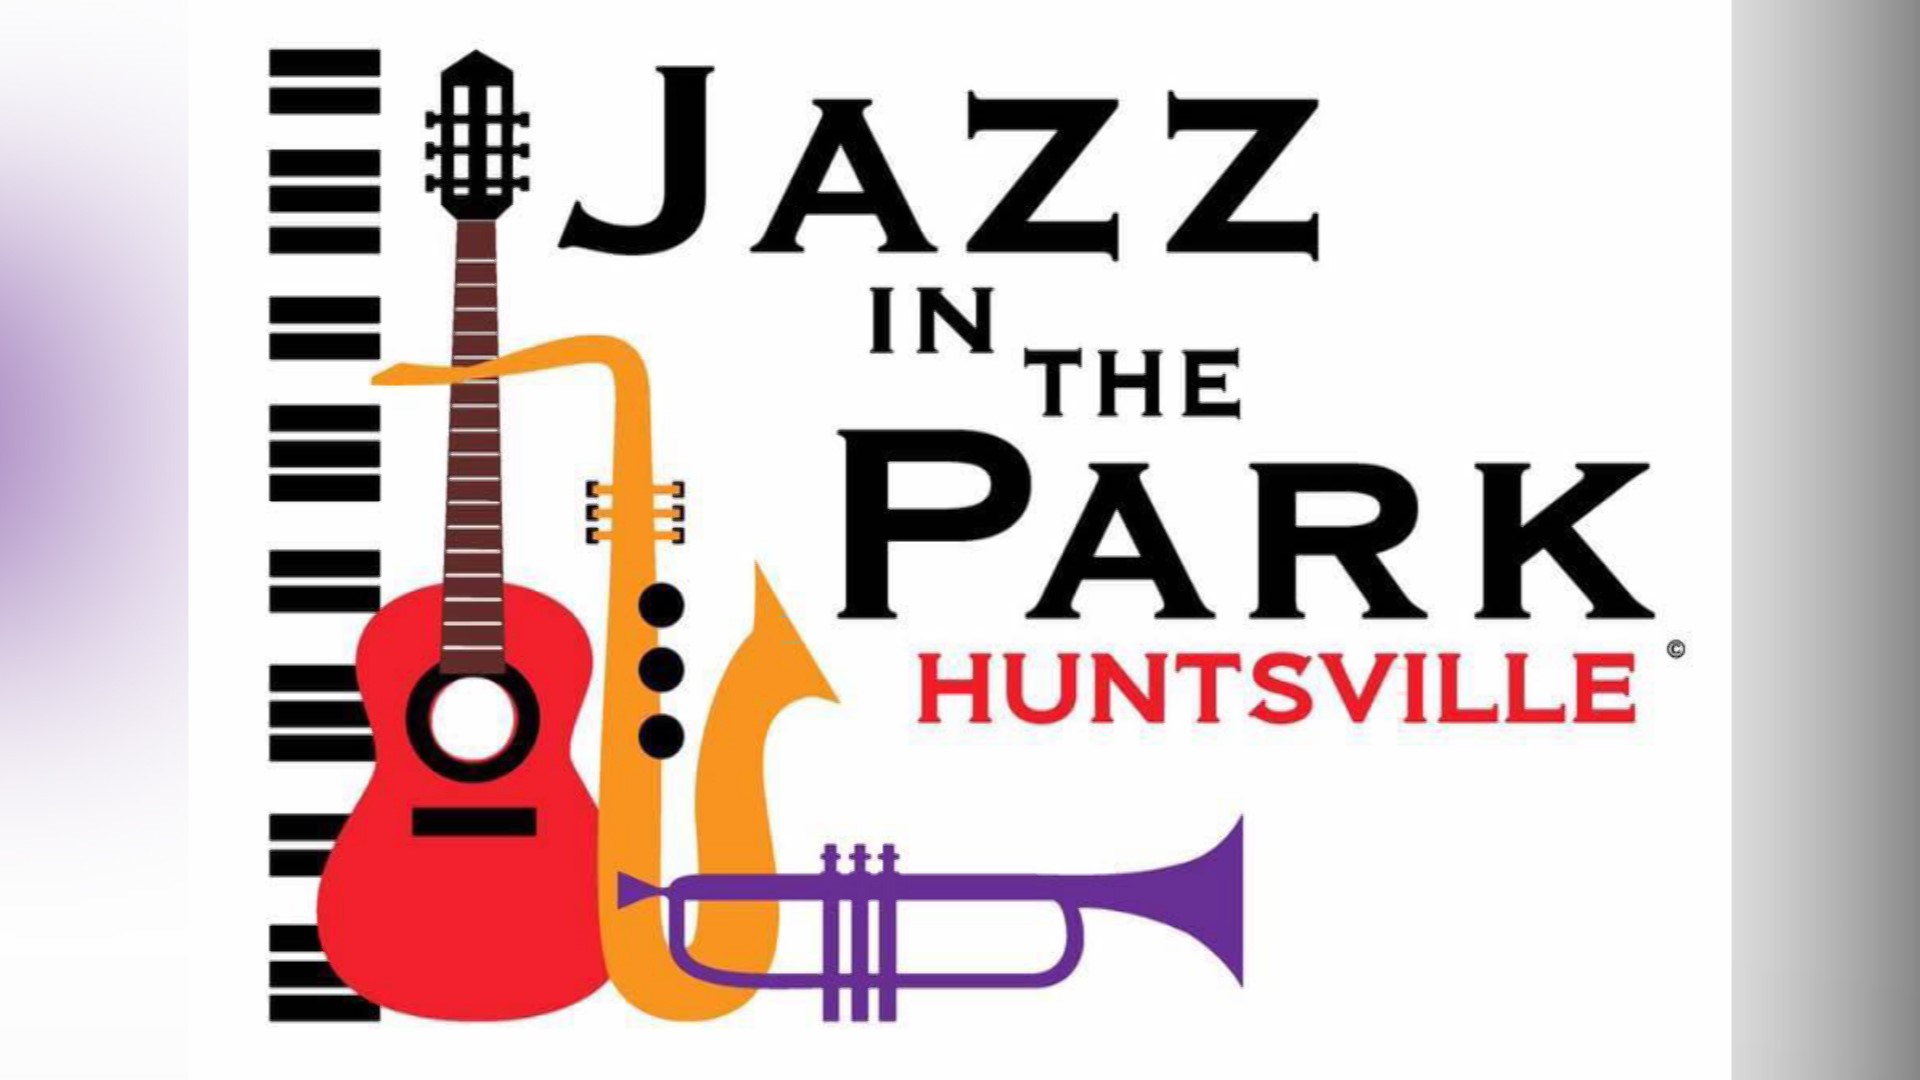 Watch the 2021 Jazz in the Park - Huntsville concert featuring John Stoddart, Ragan Whiteside, and a special remembrance of founder Bernard Lockhart.